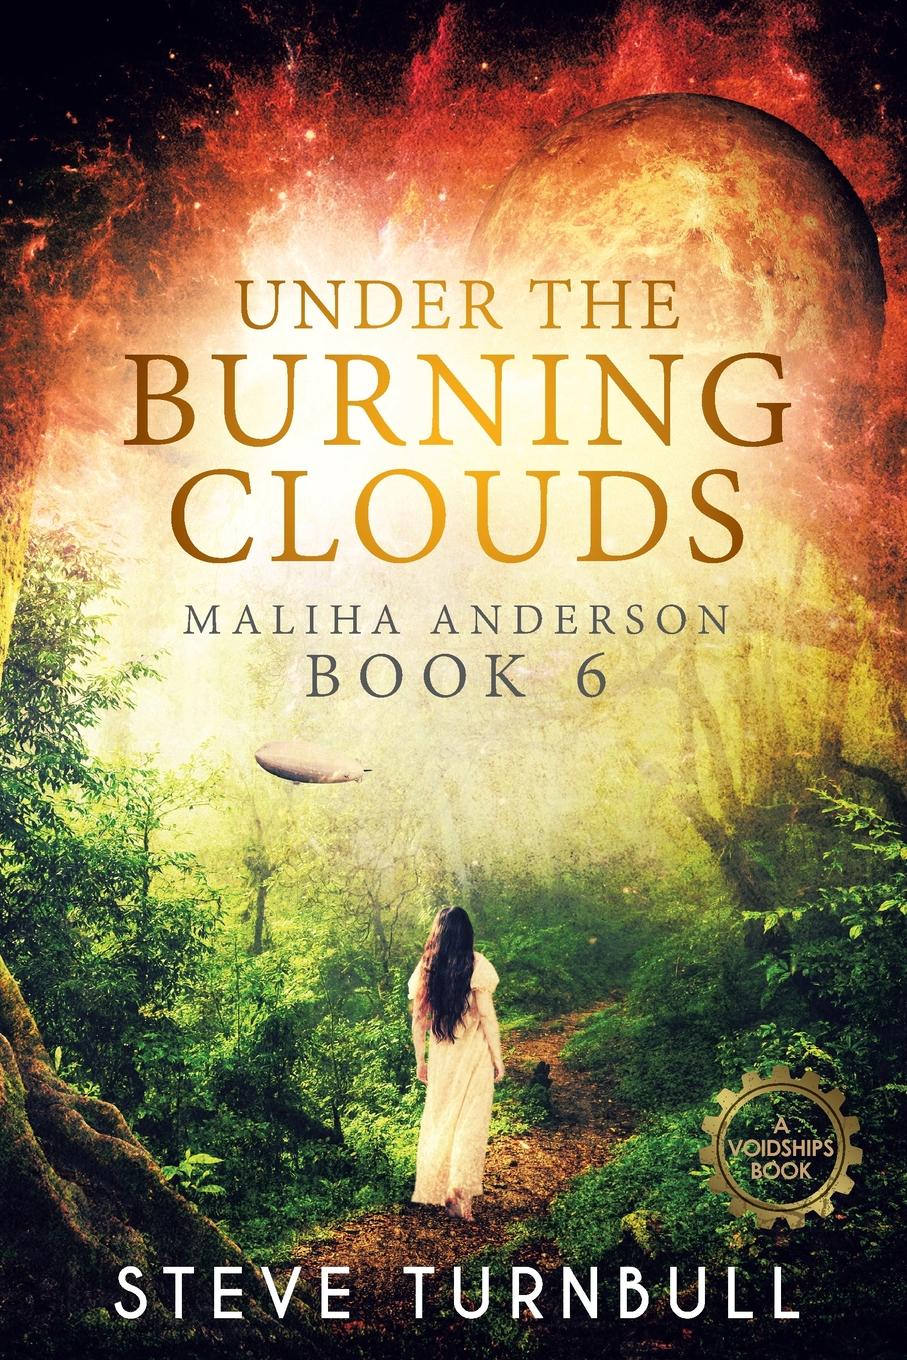 Under the Burning Clouds. Maliha Anderson, Book 6